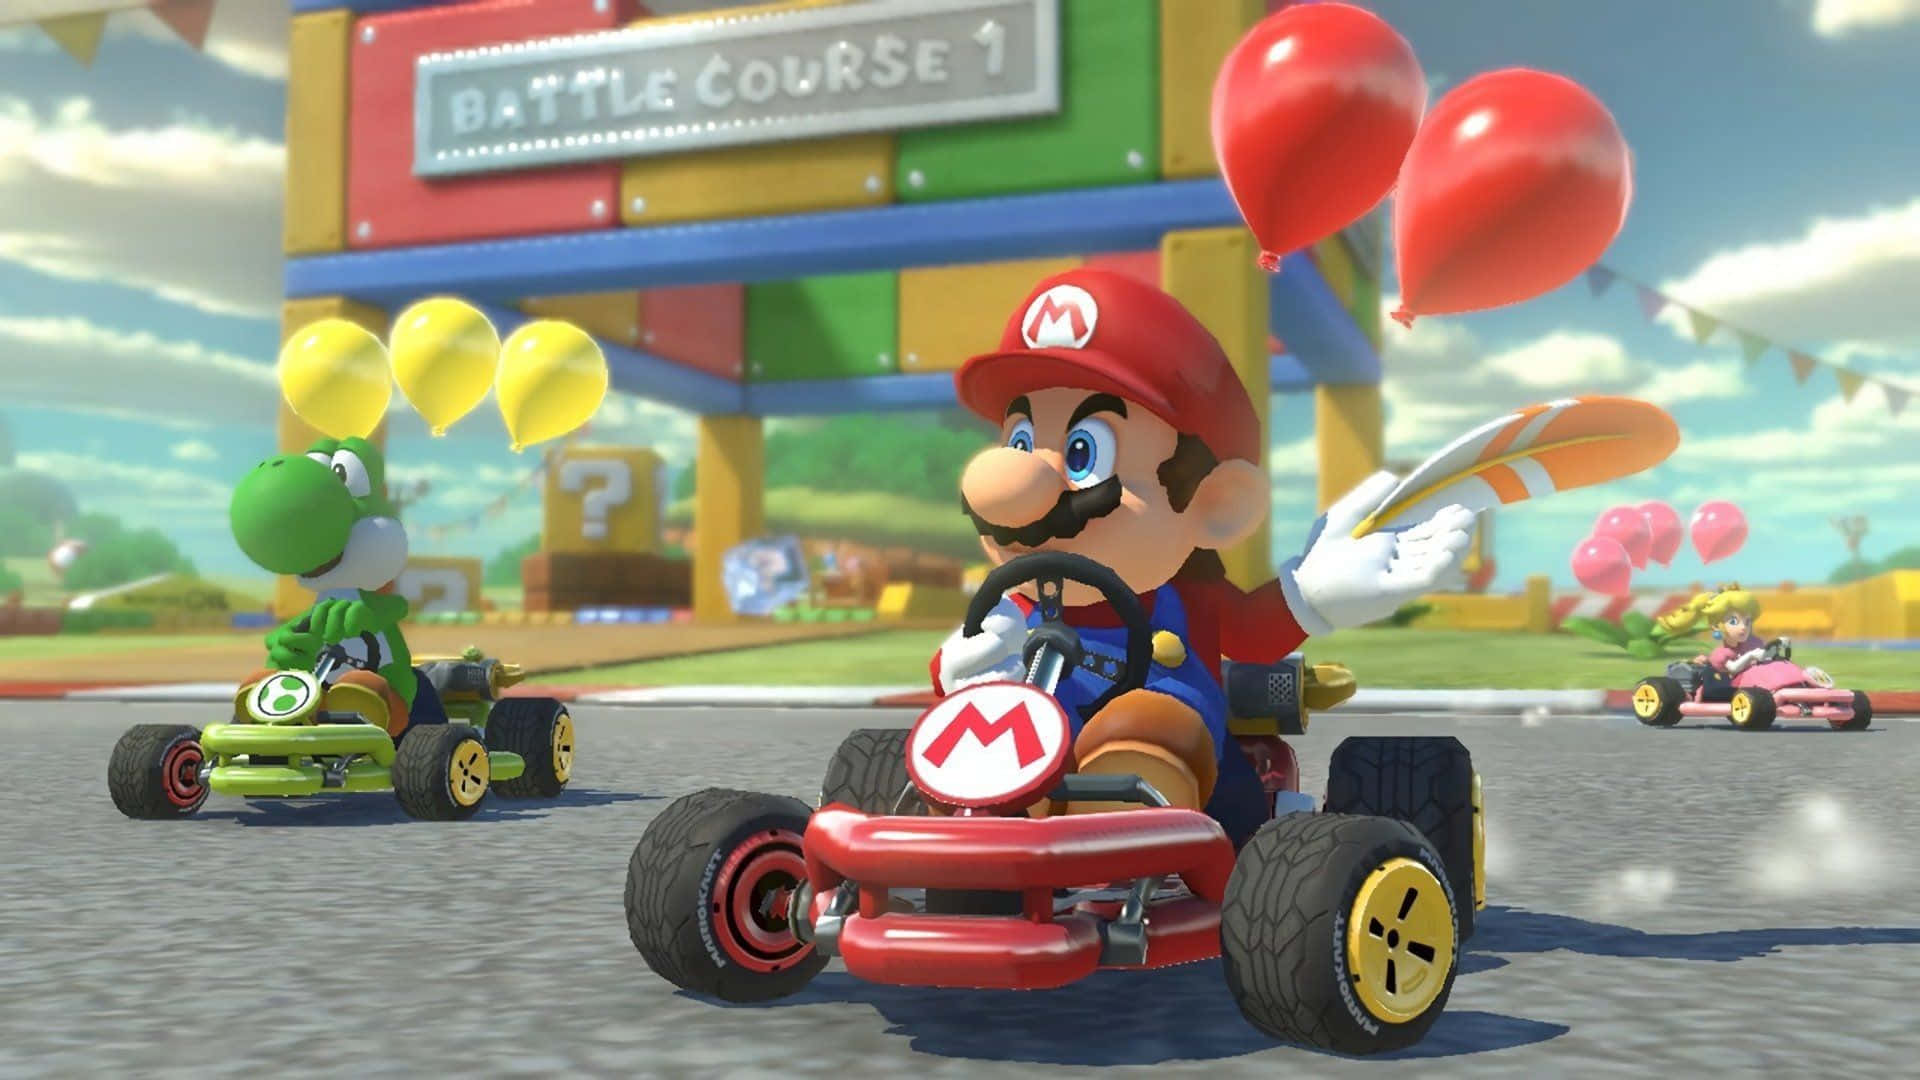 Ready, Set, Go - Participate in the Exciting Racing Excitement of Mario Kart!